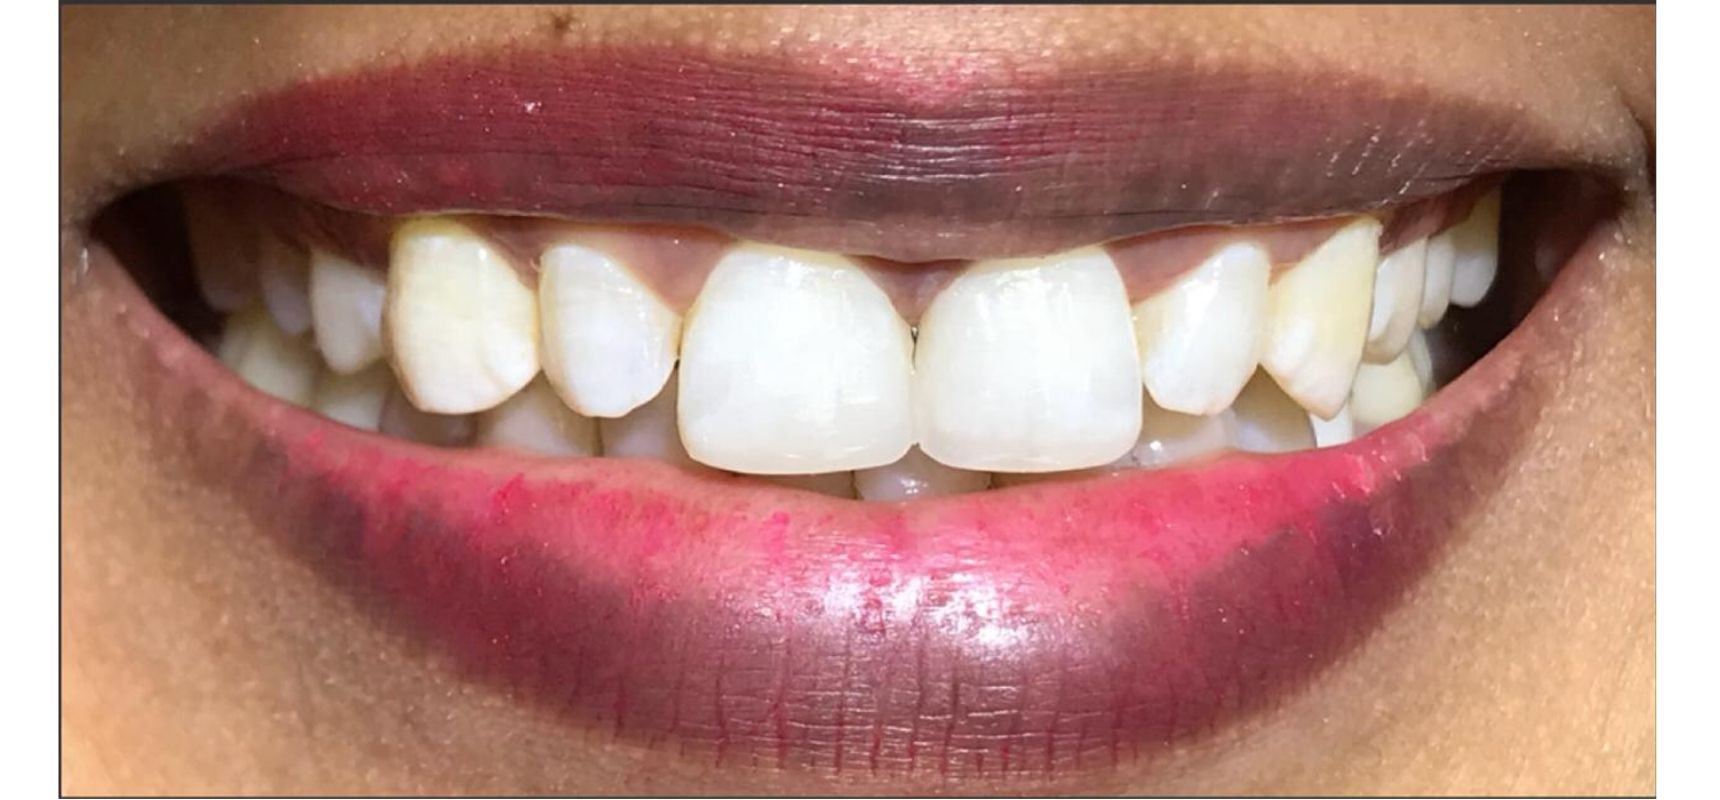 After-Composite filling to close midline diastema and teeth length adjustment